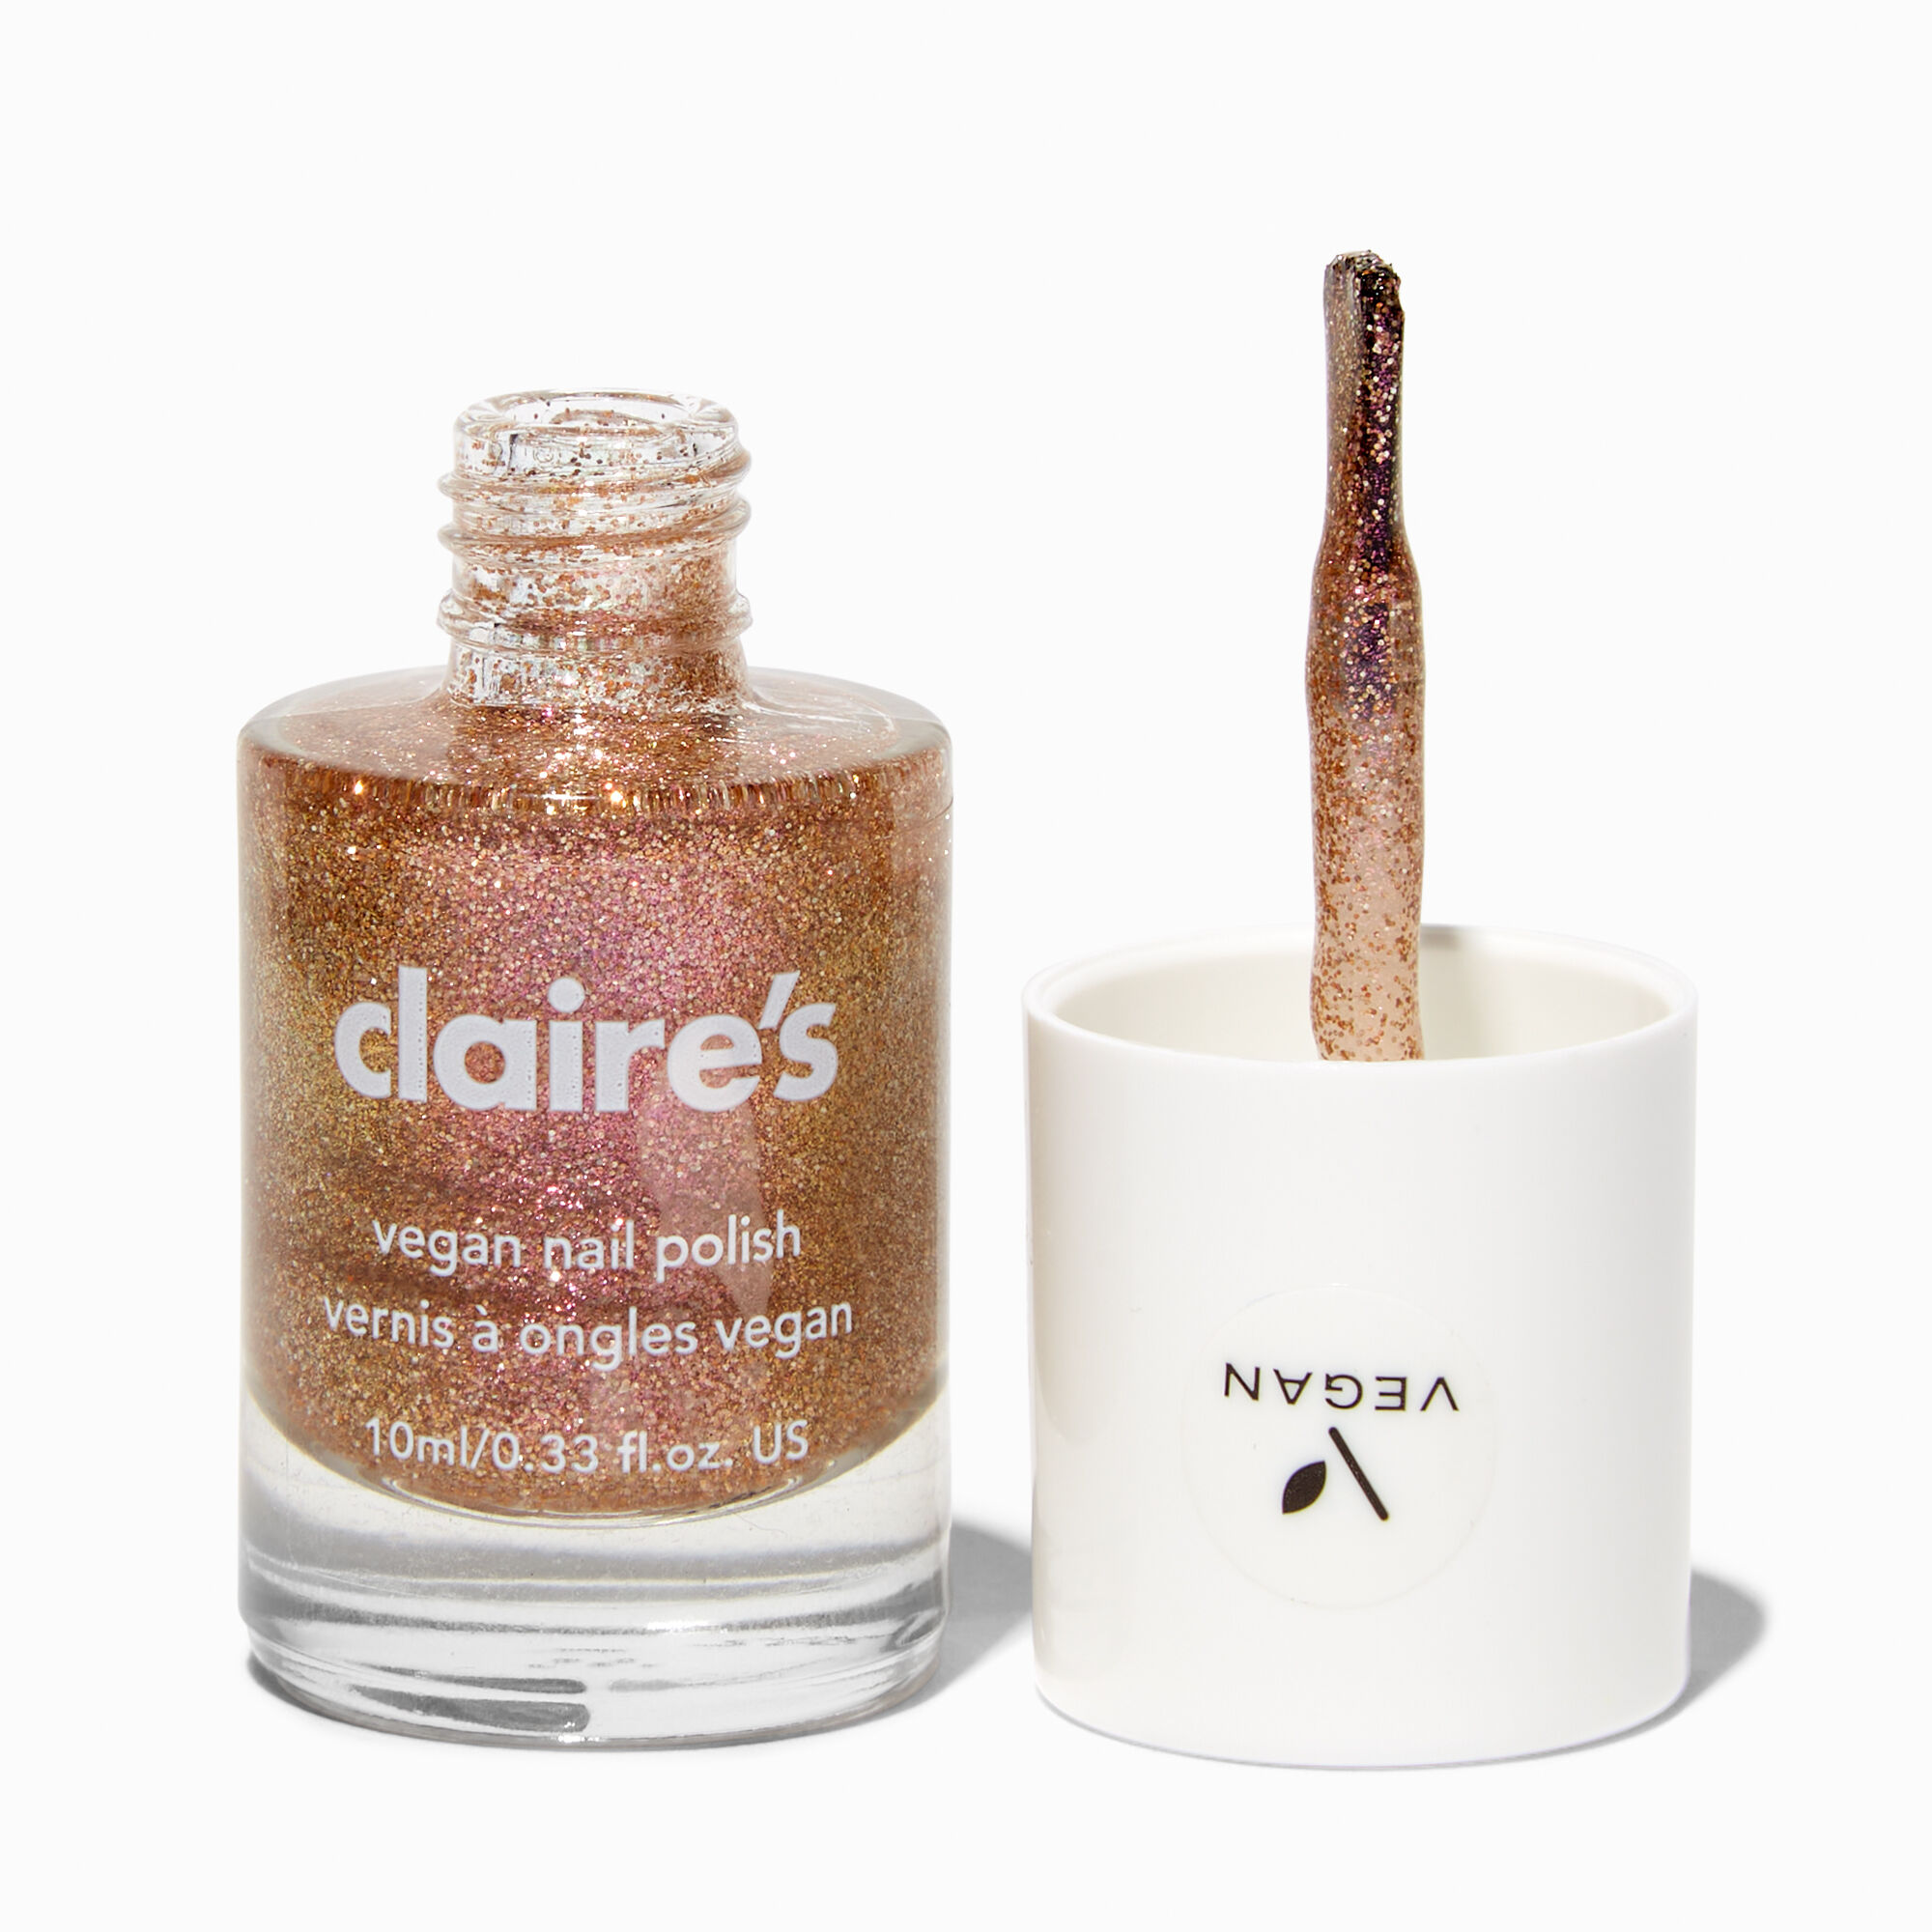 View Claires Vegan Glitter Nail Polish Bronzed Gold information